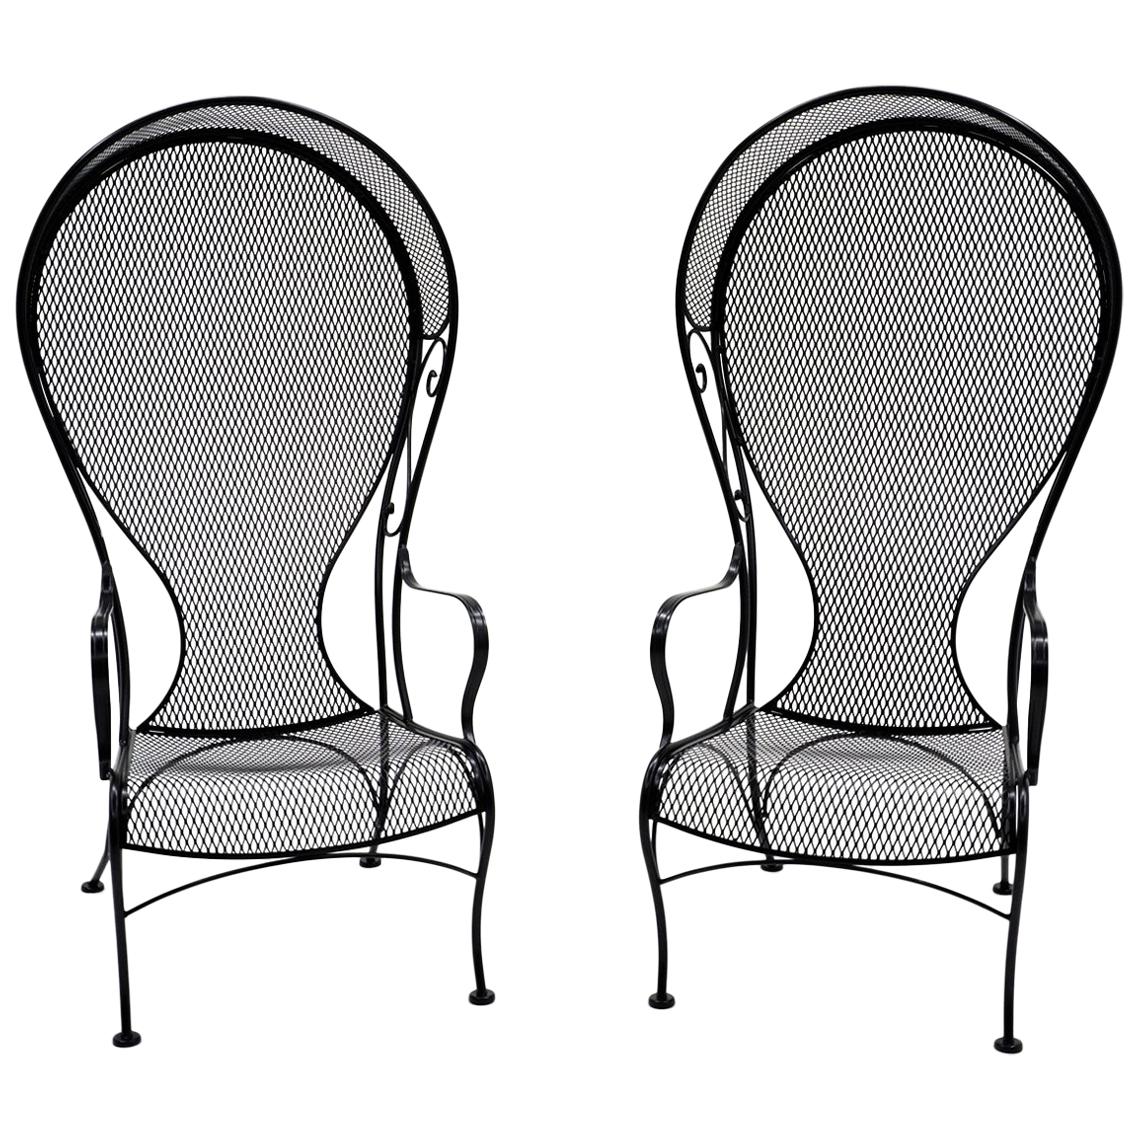 Pair of High Back Outdoor Canopy Chairs by Russell Woodard Satin Black Excellent